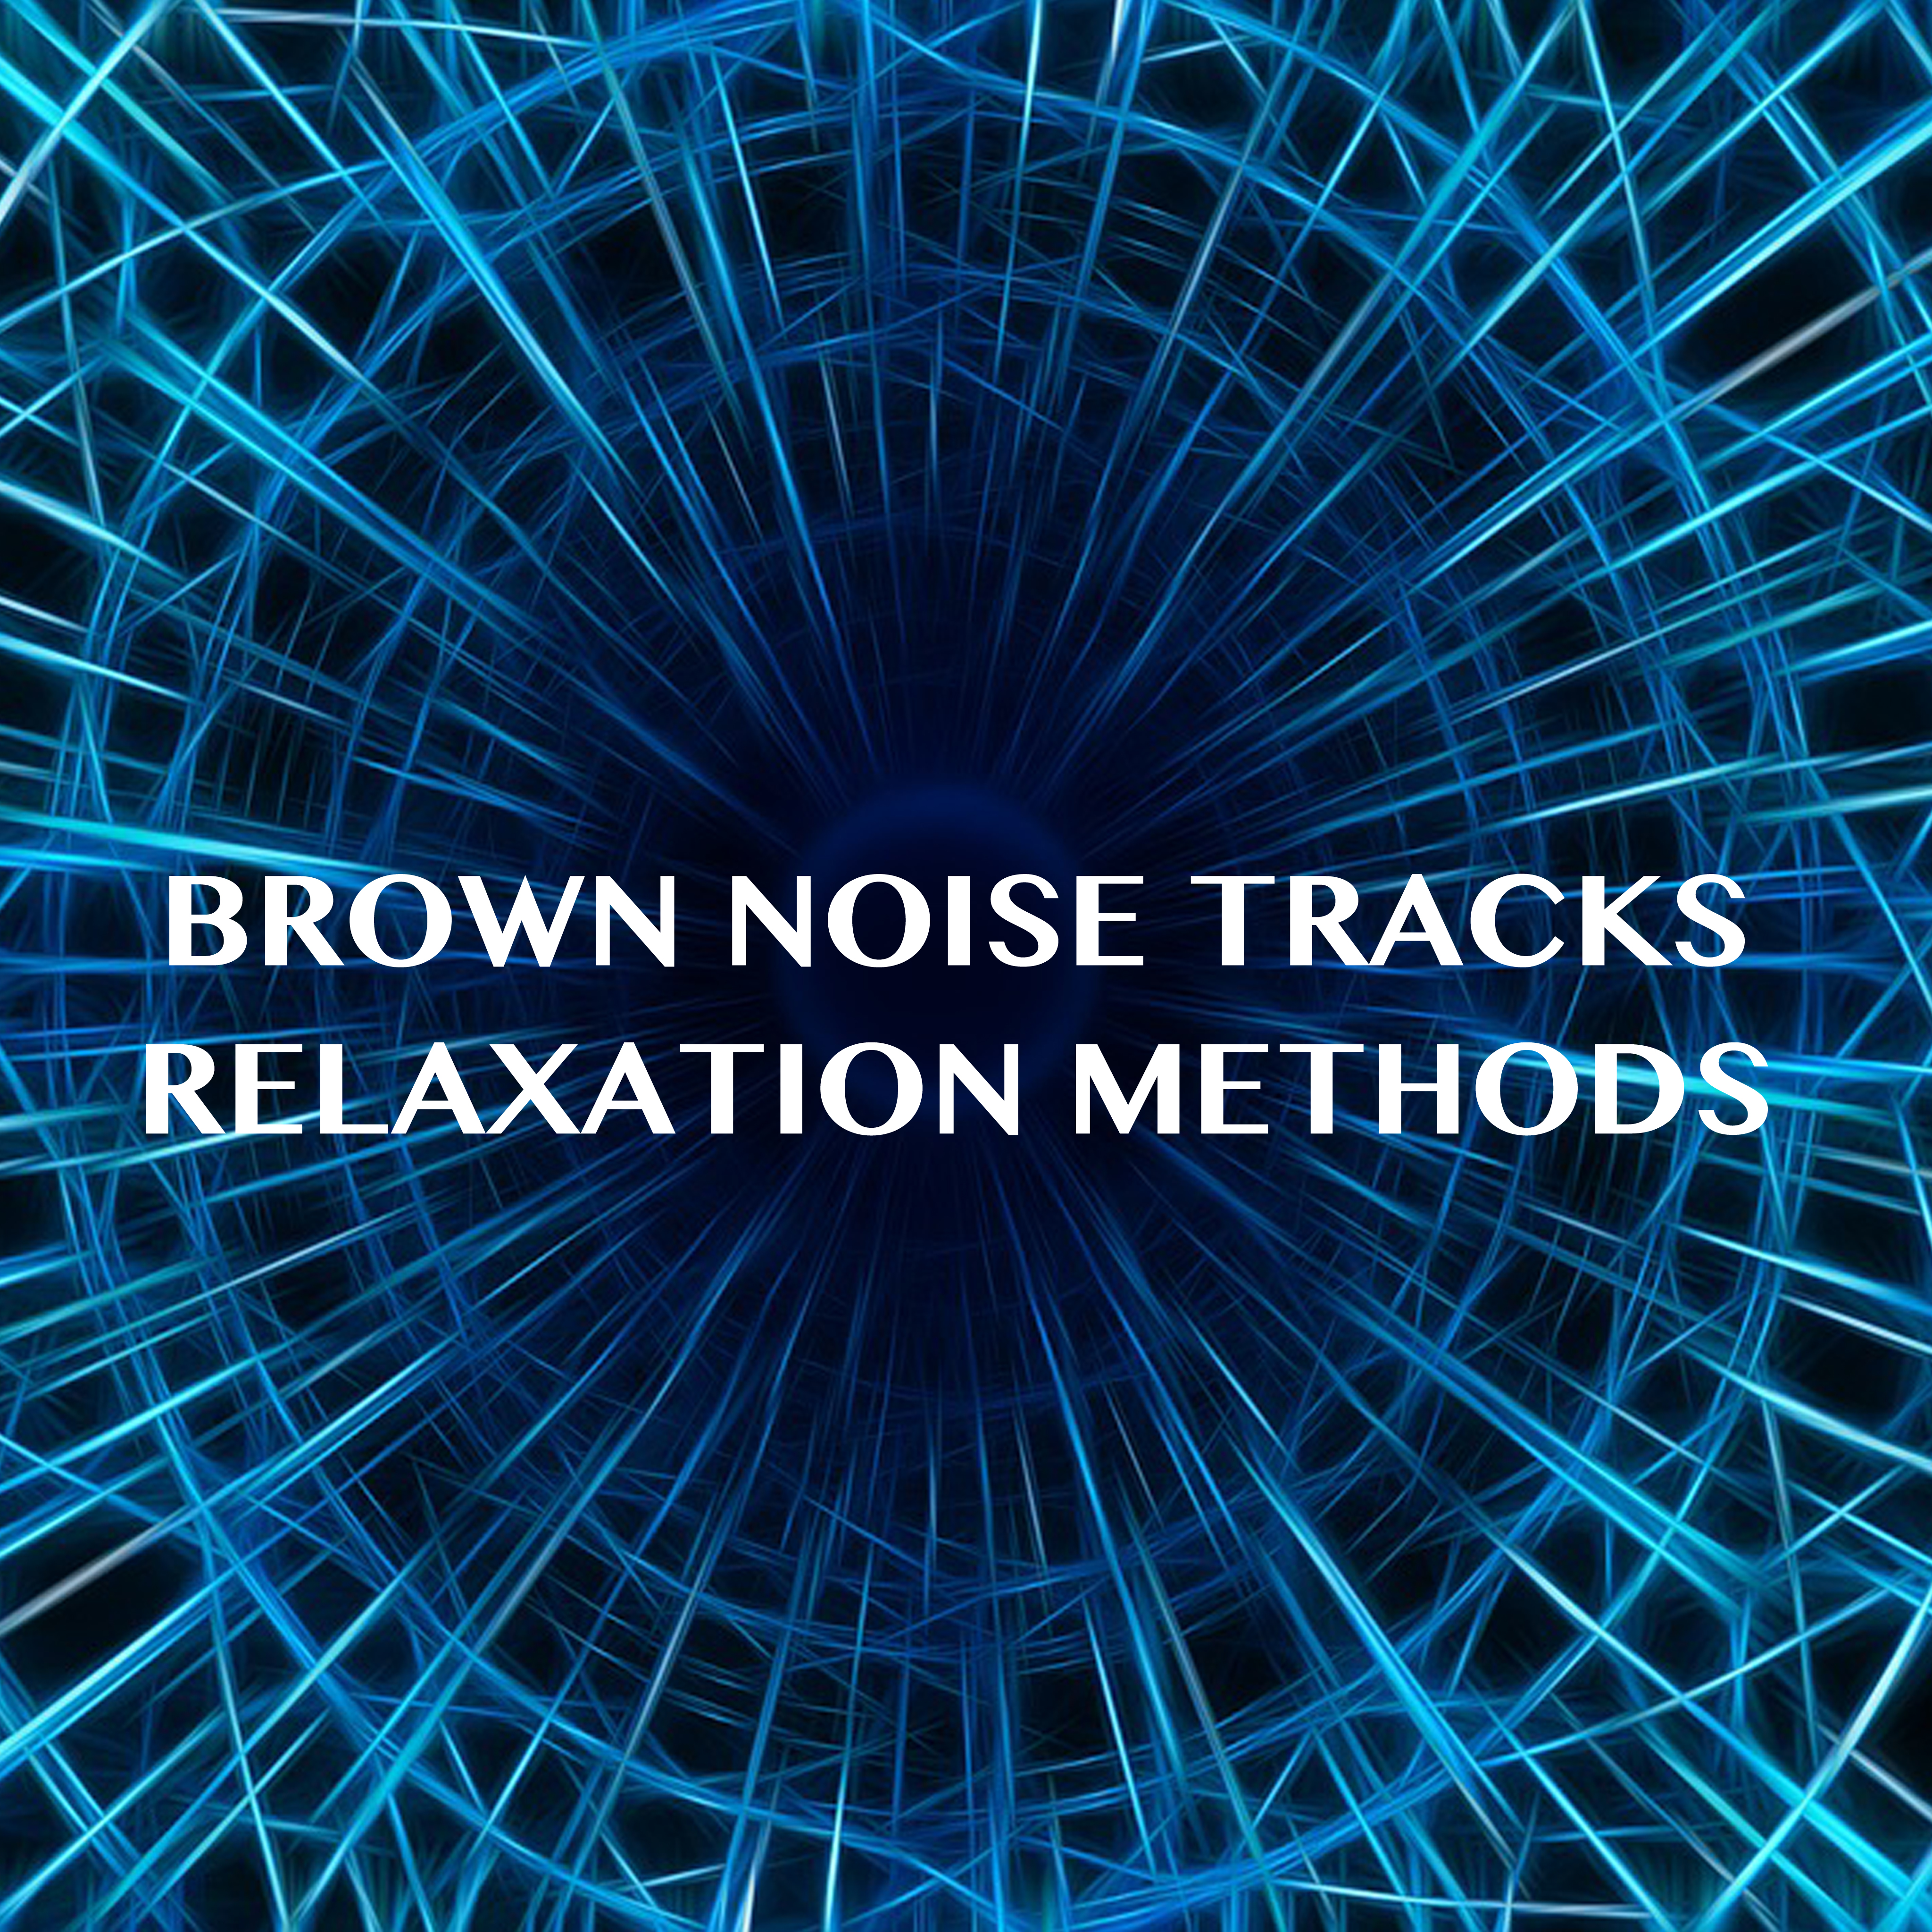 14 Brown Noise Tracks - Relaxation Methods